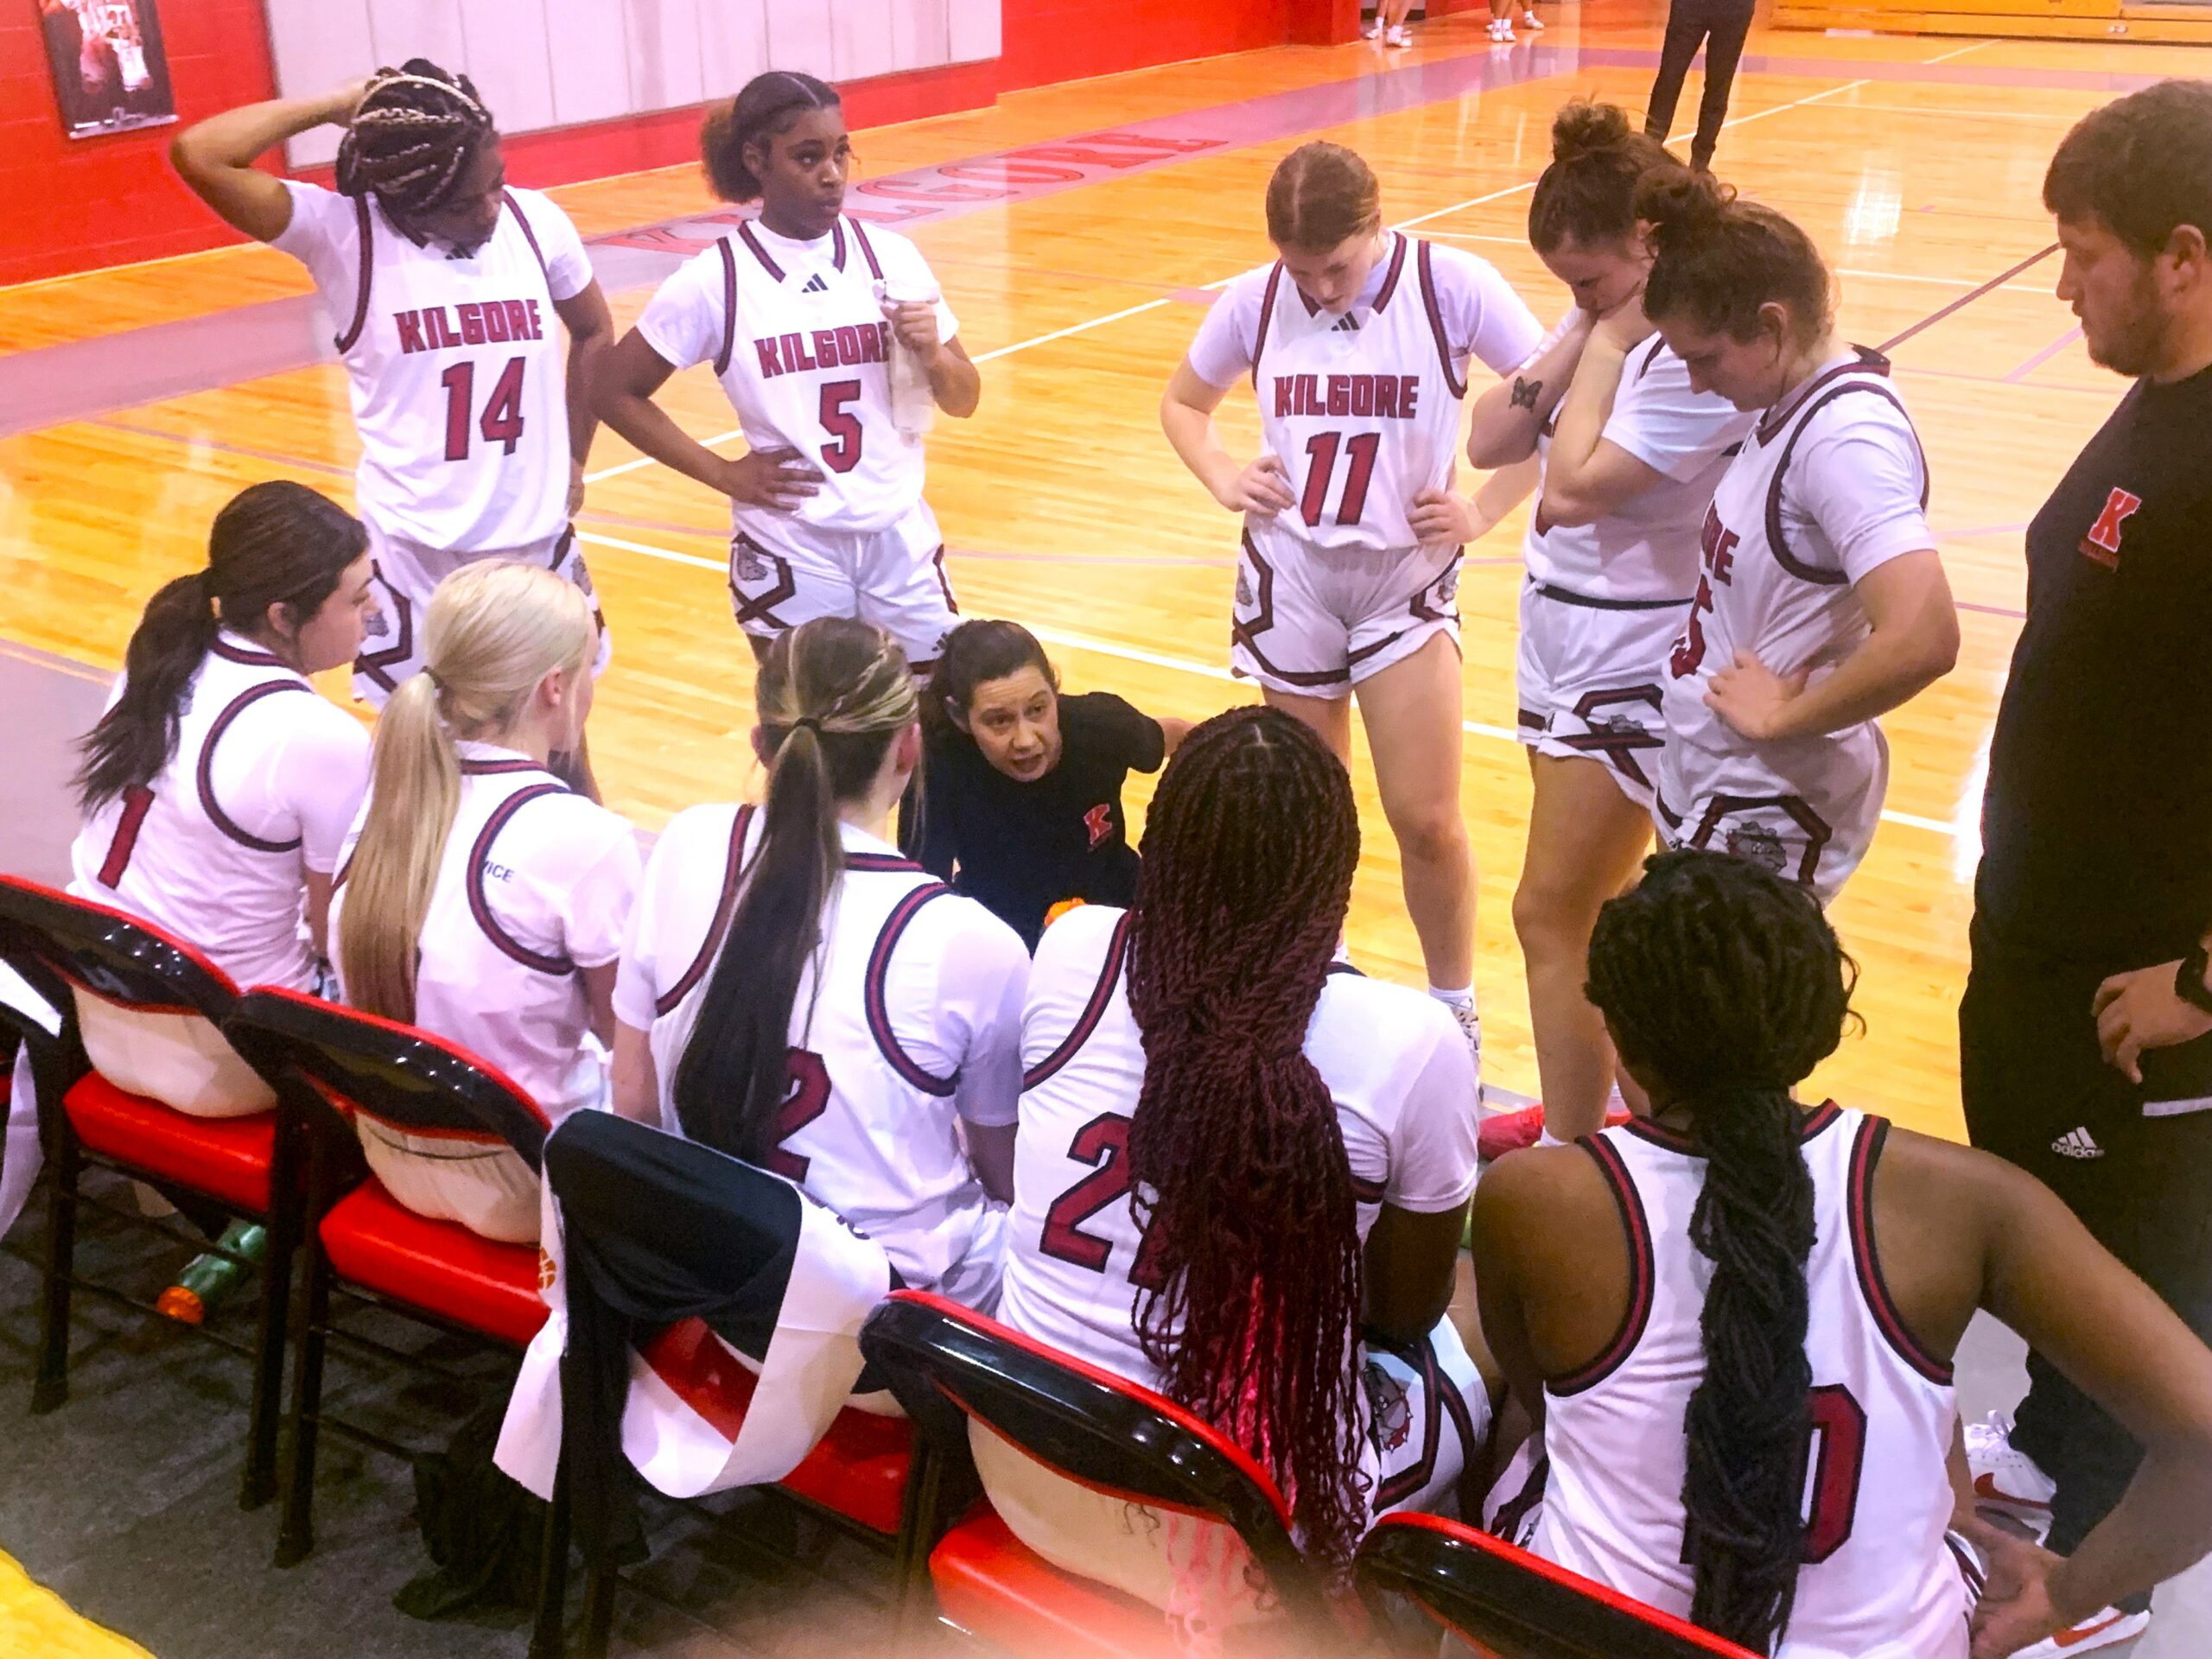 Kilgore girls basketball coach Marissa Coop (center, kneeling) talks to her team during a time-out against Carthage. The girls dropped the contest to Carthage, 42-17, but Kilgore's boys defeated Carthage, 60-40, in the nightcap. The Hi-Steppers got a great ovation after a performance during the boys' halftime. (Photo by MITCH LUCAS - ETBLITZ.COM)